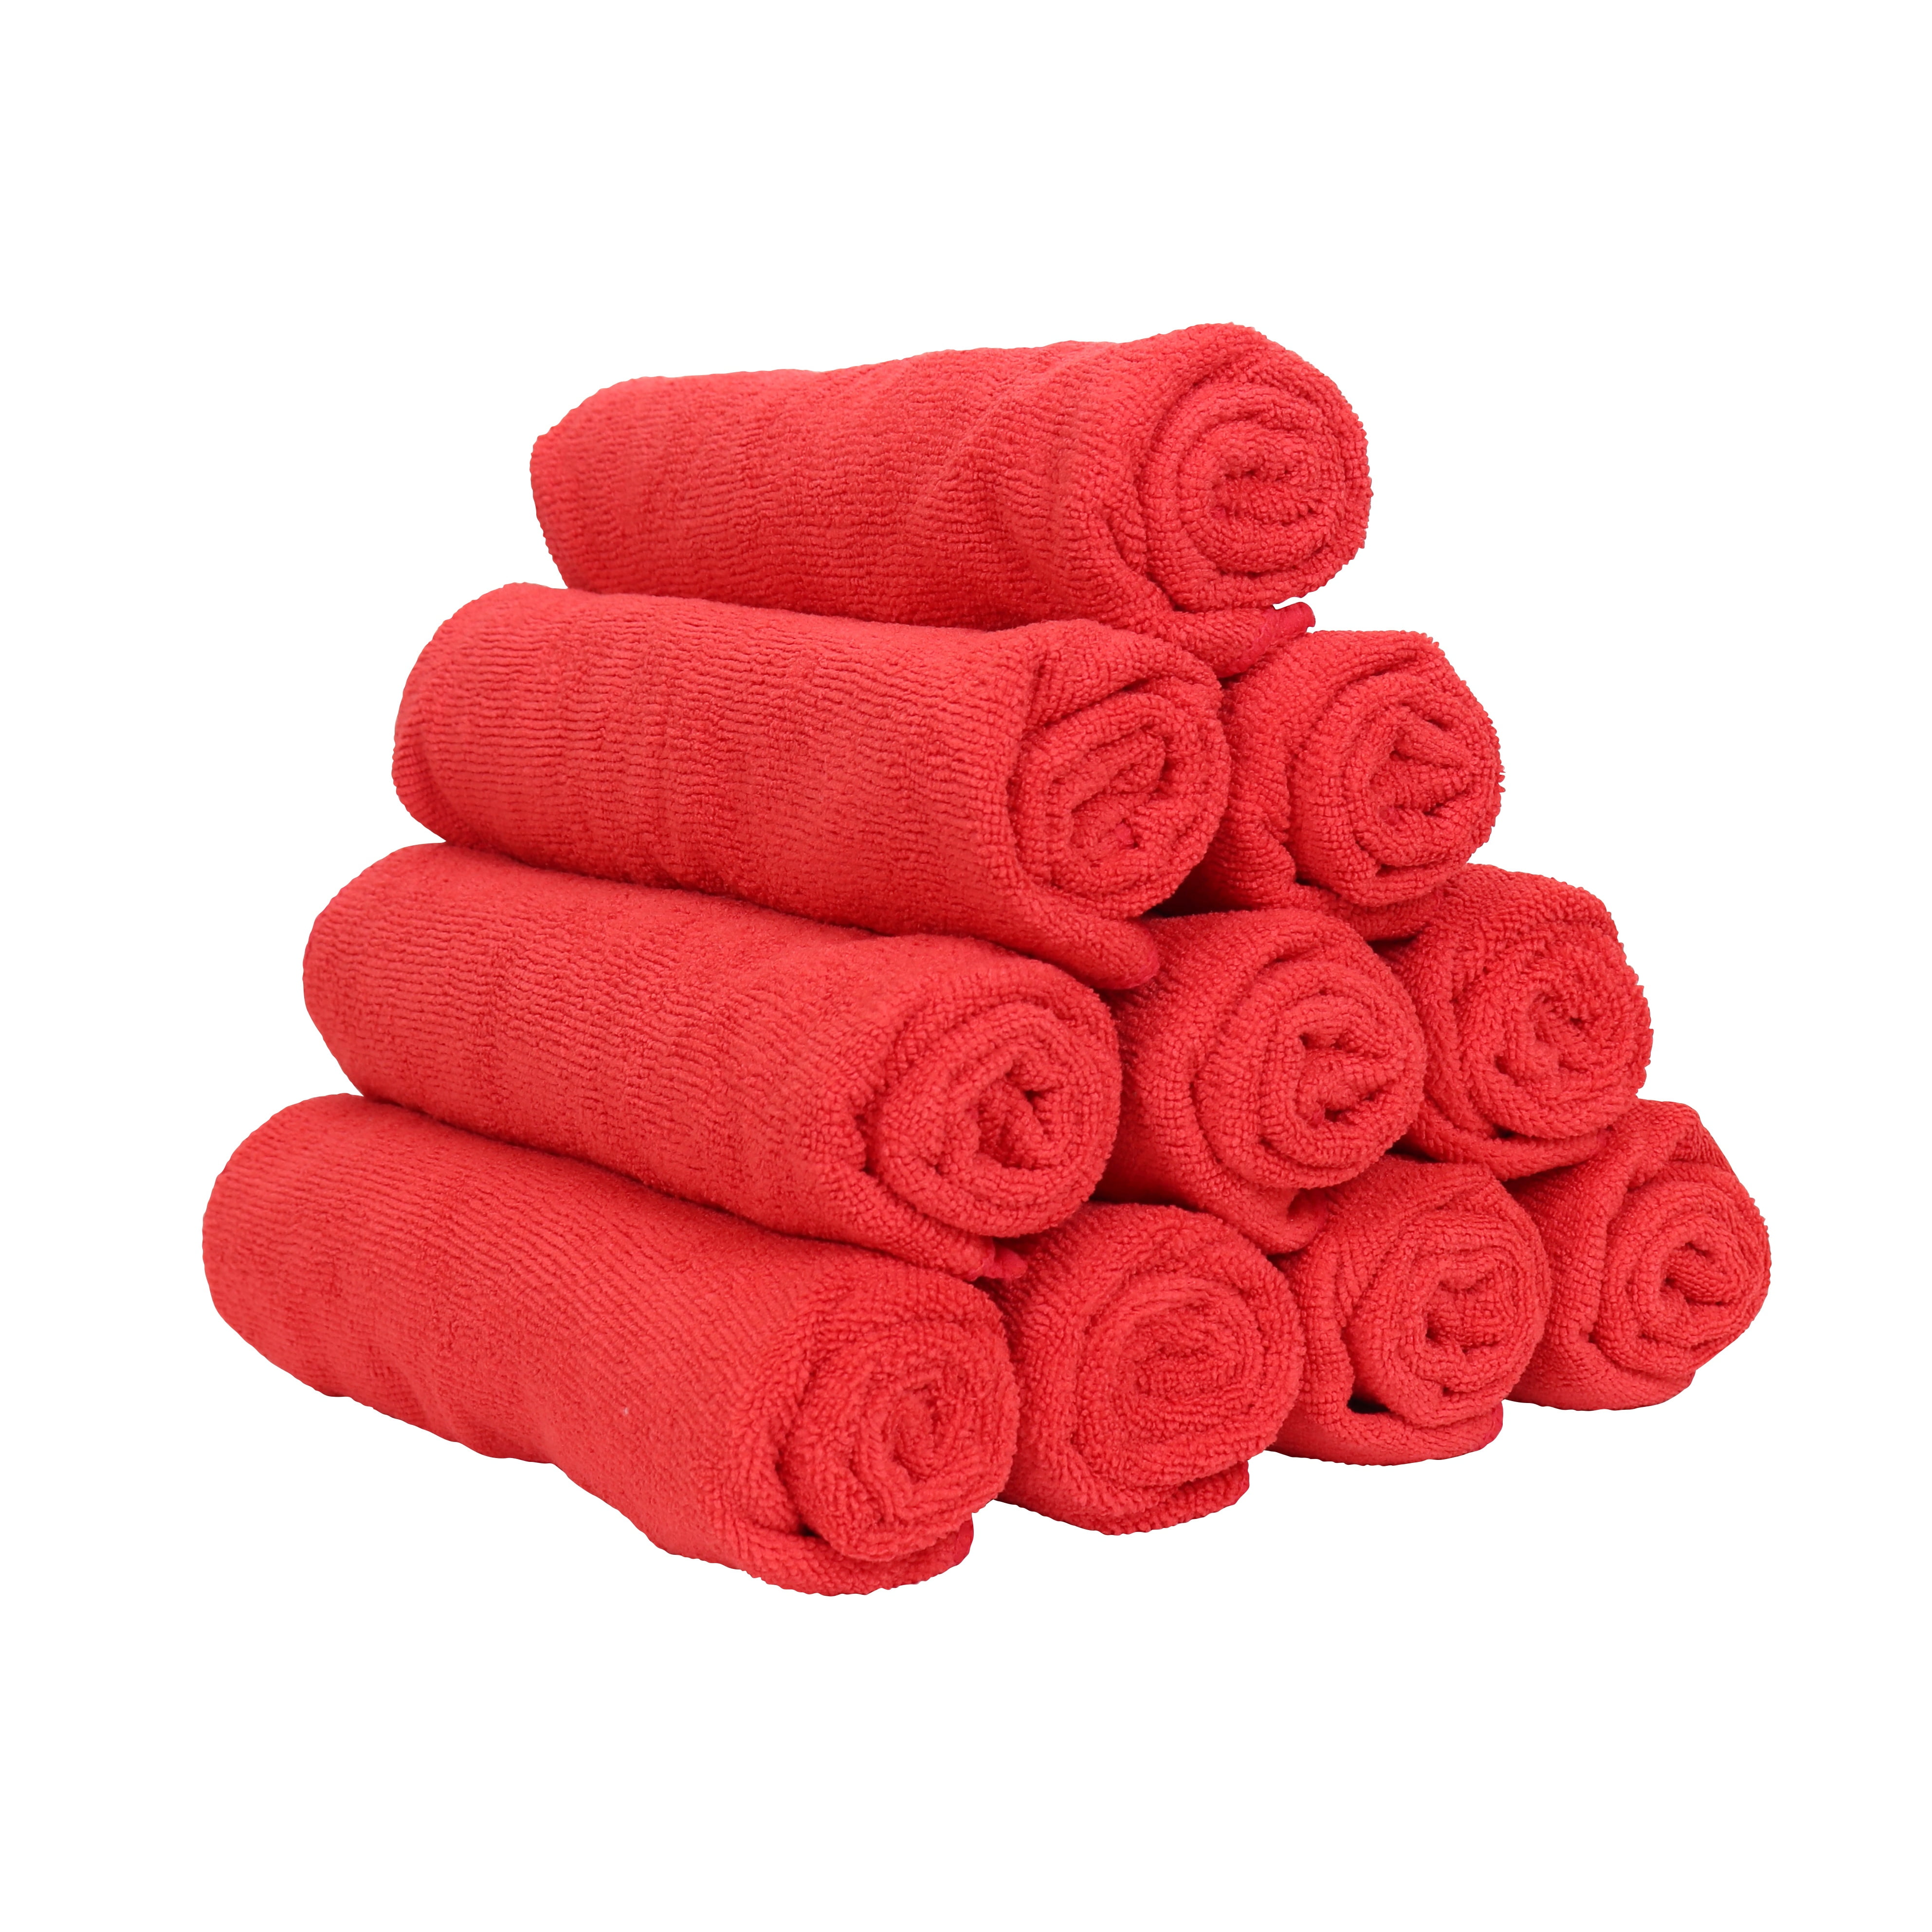 Xero Fish Scale Towel XL Ruby - Pack of Ten, Red